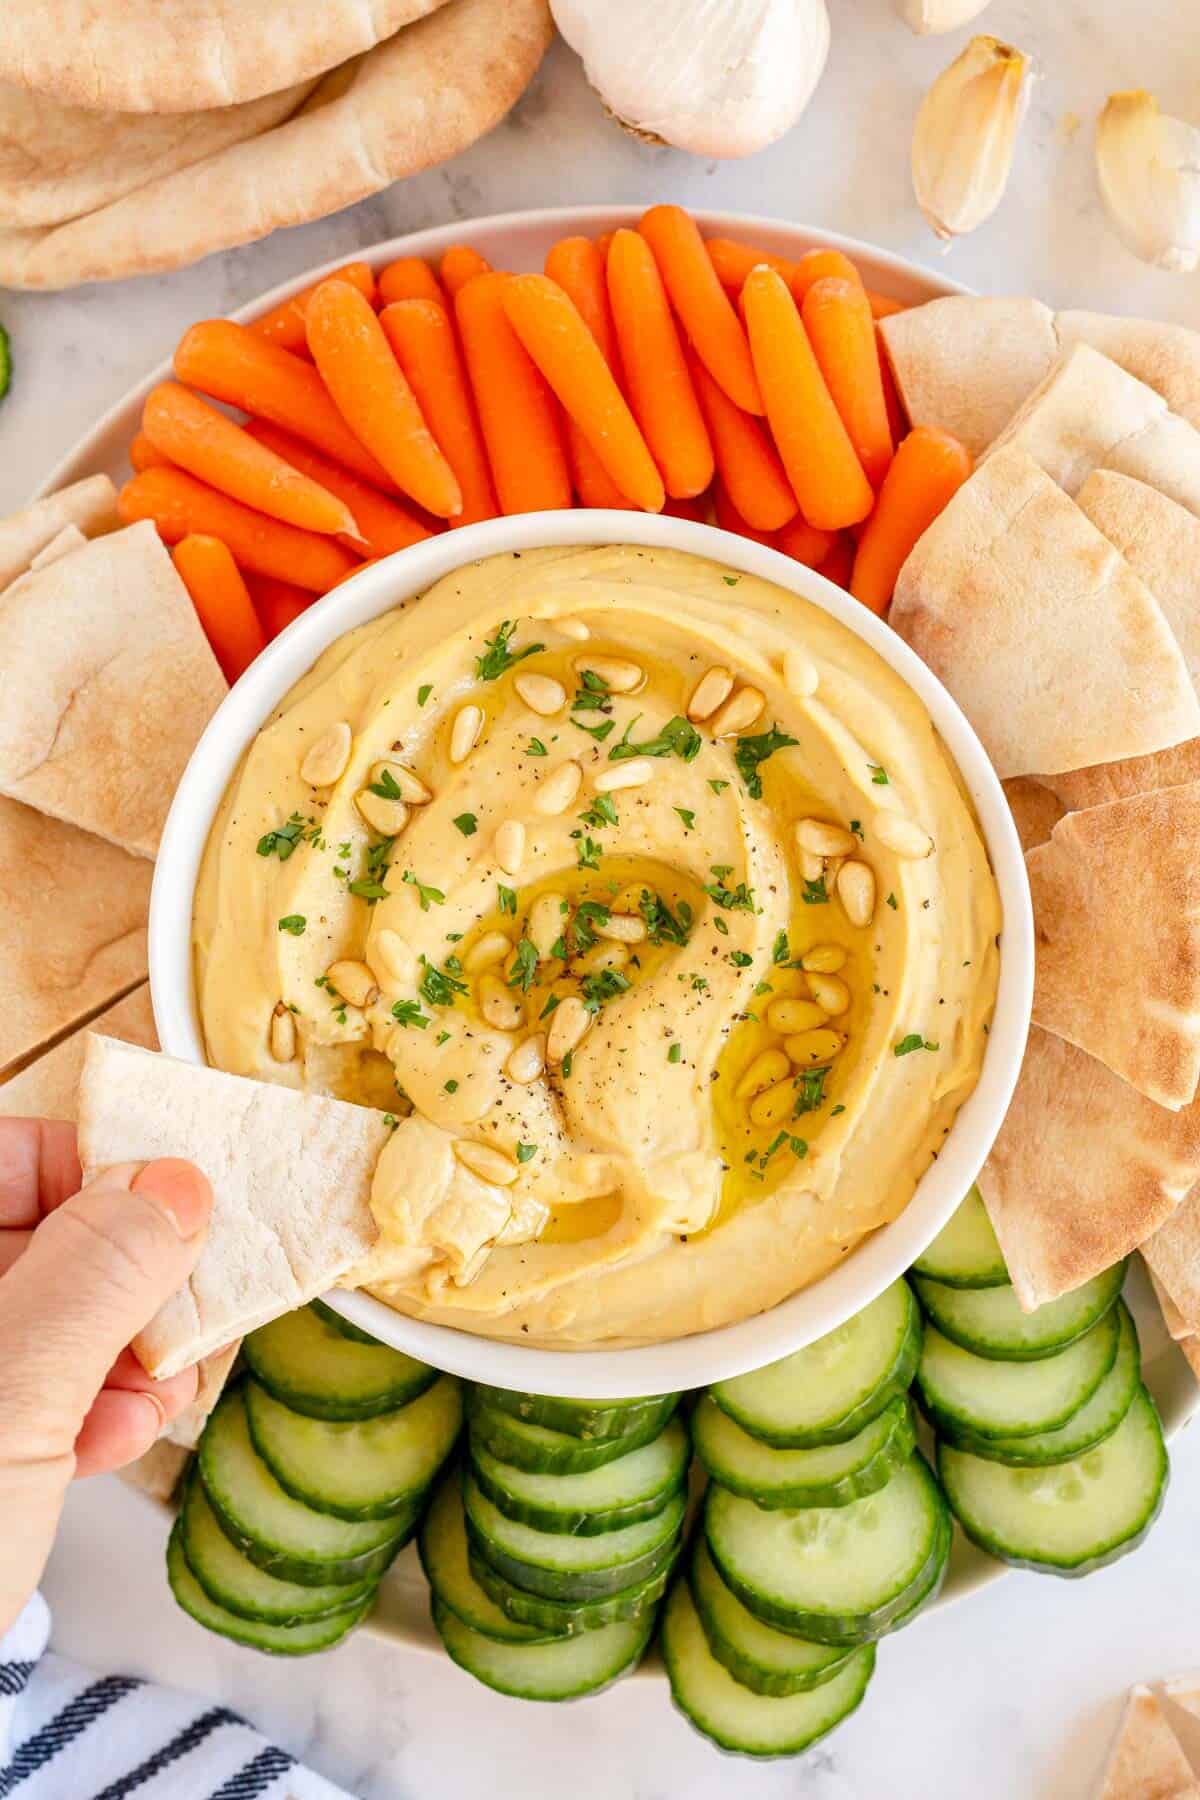 roasted garlic hummus in a white bowl with pita bread, carrots and cucumbers with a hand and pita bread